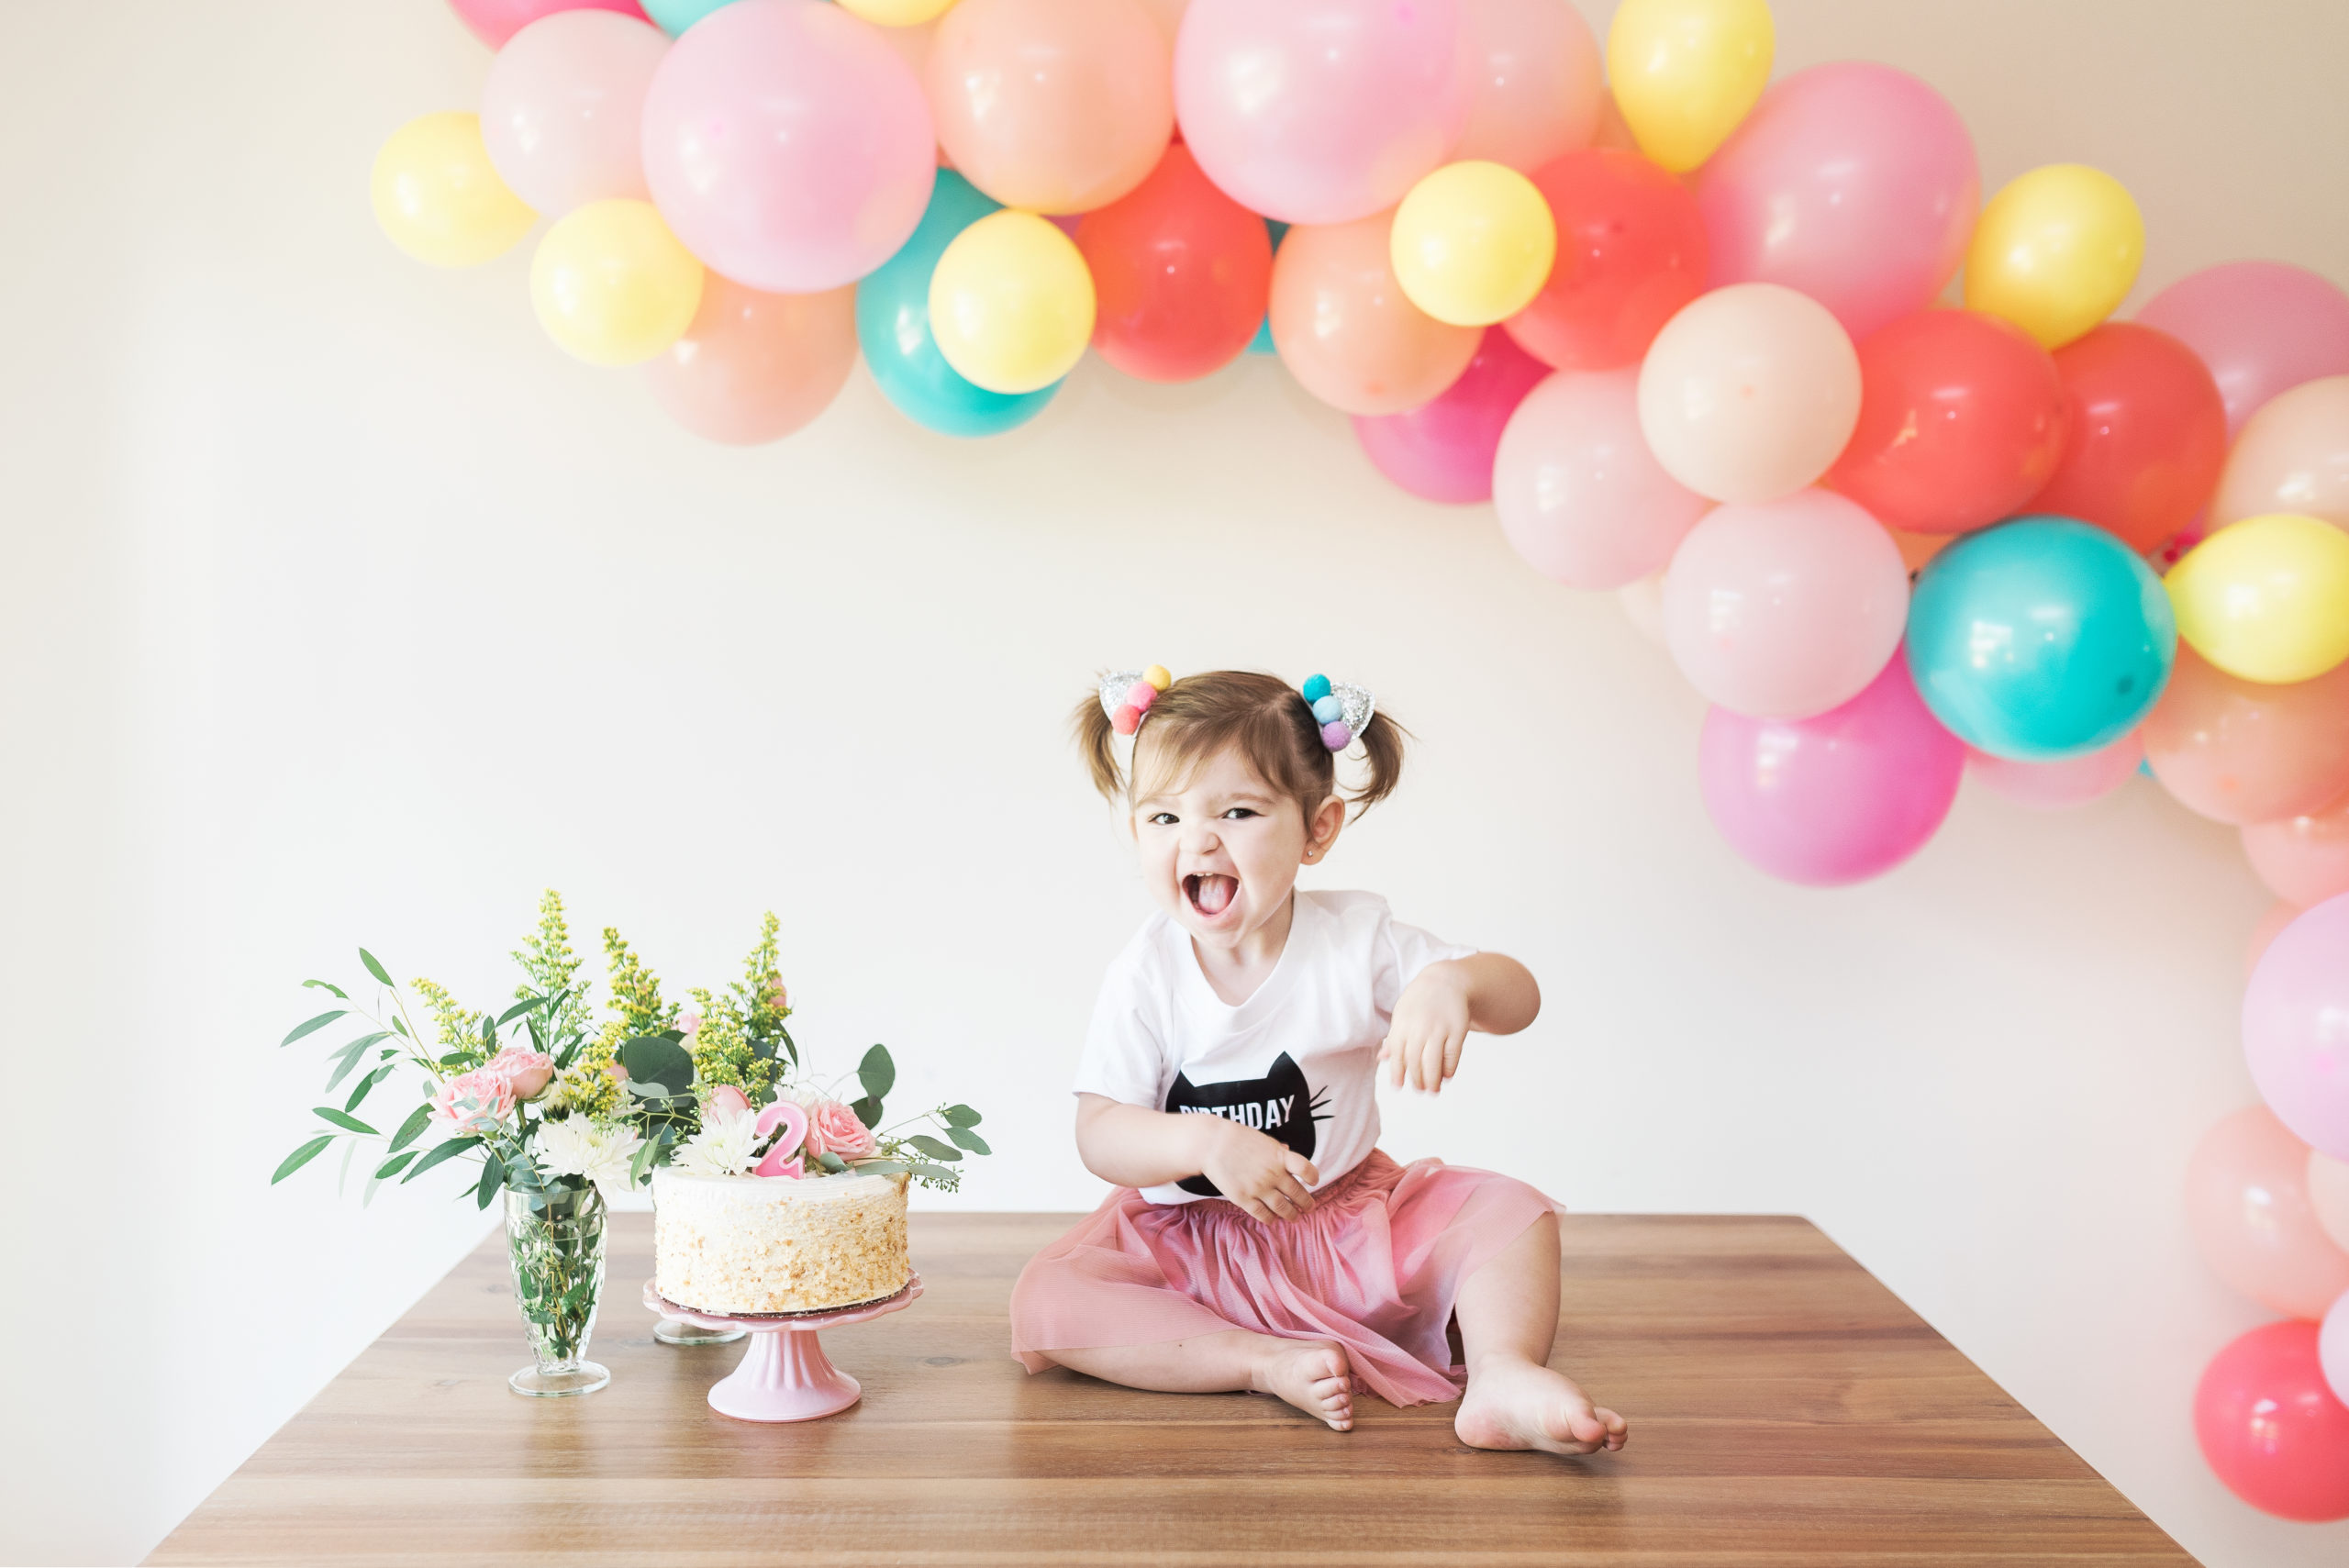 daughter next to cake and flowers with birthday balloon garland behind